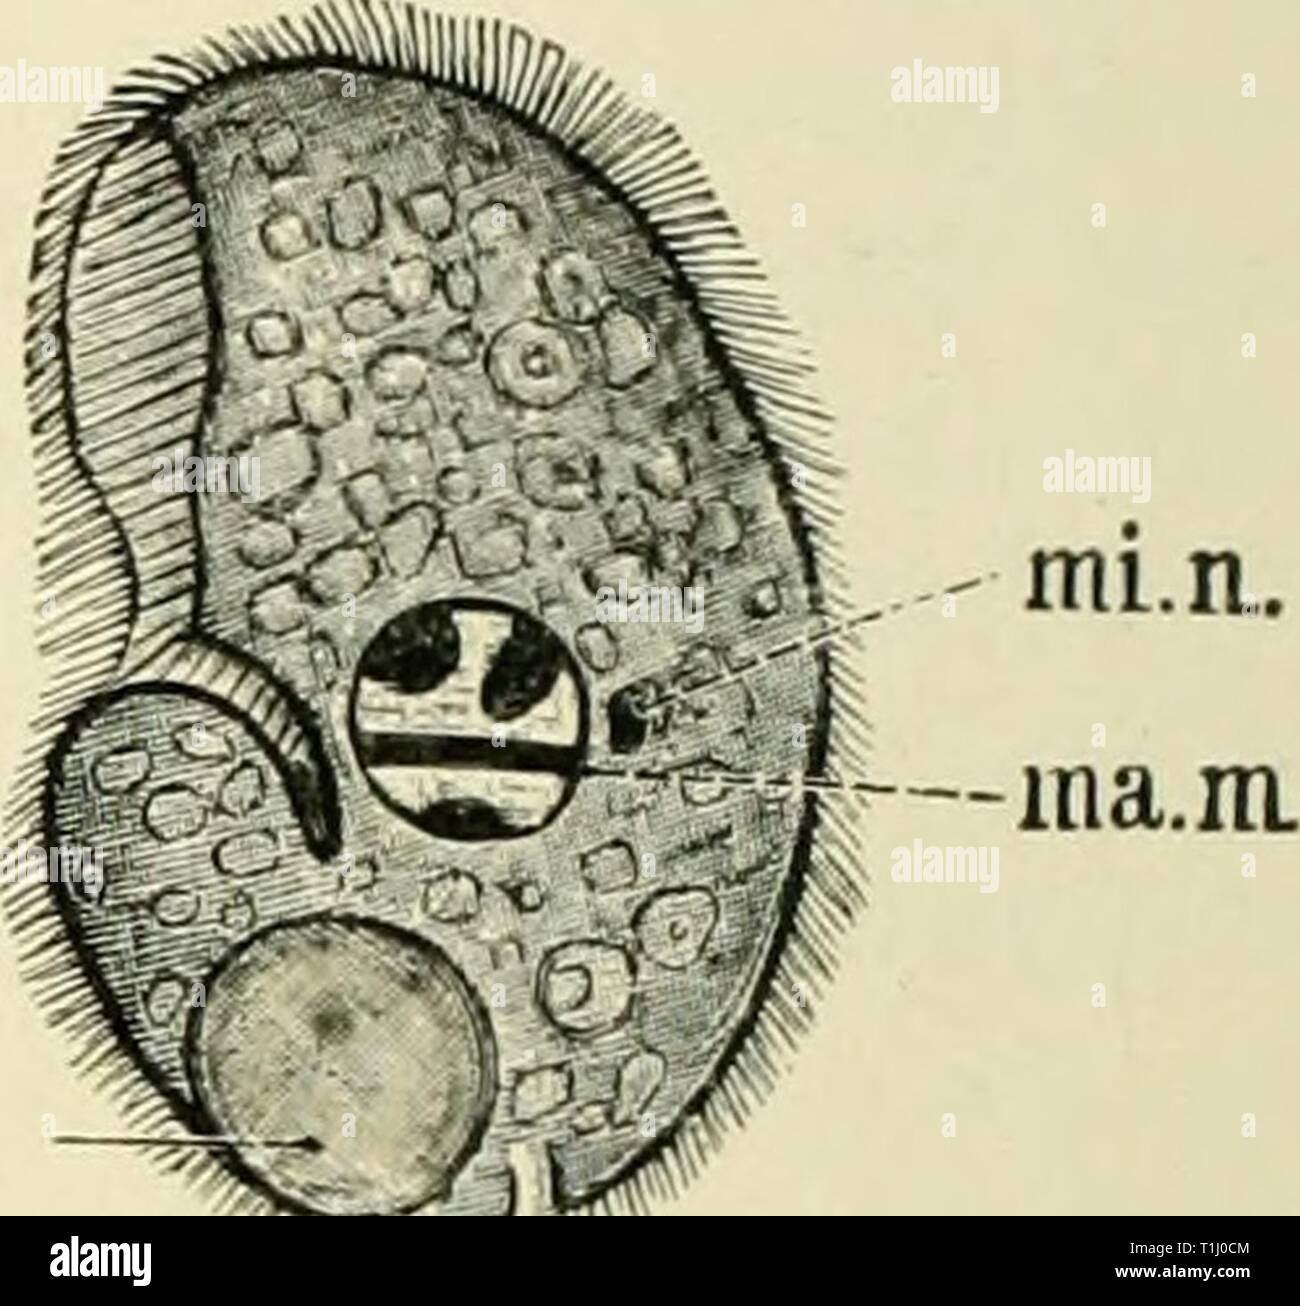 Diseases of metabolism and of Diseases of metabolism and of the blood, animal parasites, toxicology  diseasesofmetabo00cabo Year: 1906  Fig. 30.—Balantidium Minutum. Fig. 31.—Nyctotherus Faba. n, nucleus; cv, contractile vacuole. (After mi.n, micro nucleus; ma.m, macronucleus. Schaudinn.) (After Schaudinn.) which follow. Vorticelli, which, according to Lindner, are said to infest man, cannot yet be recognized as parasitic structures. This embraces the principal protozoa which occur in man. We now come to the more highly-organized class, the plathelminthes or flat-worms. To this group, which em Stock Photo